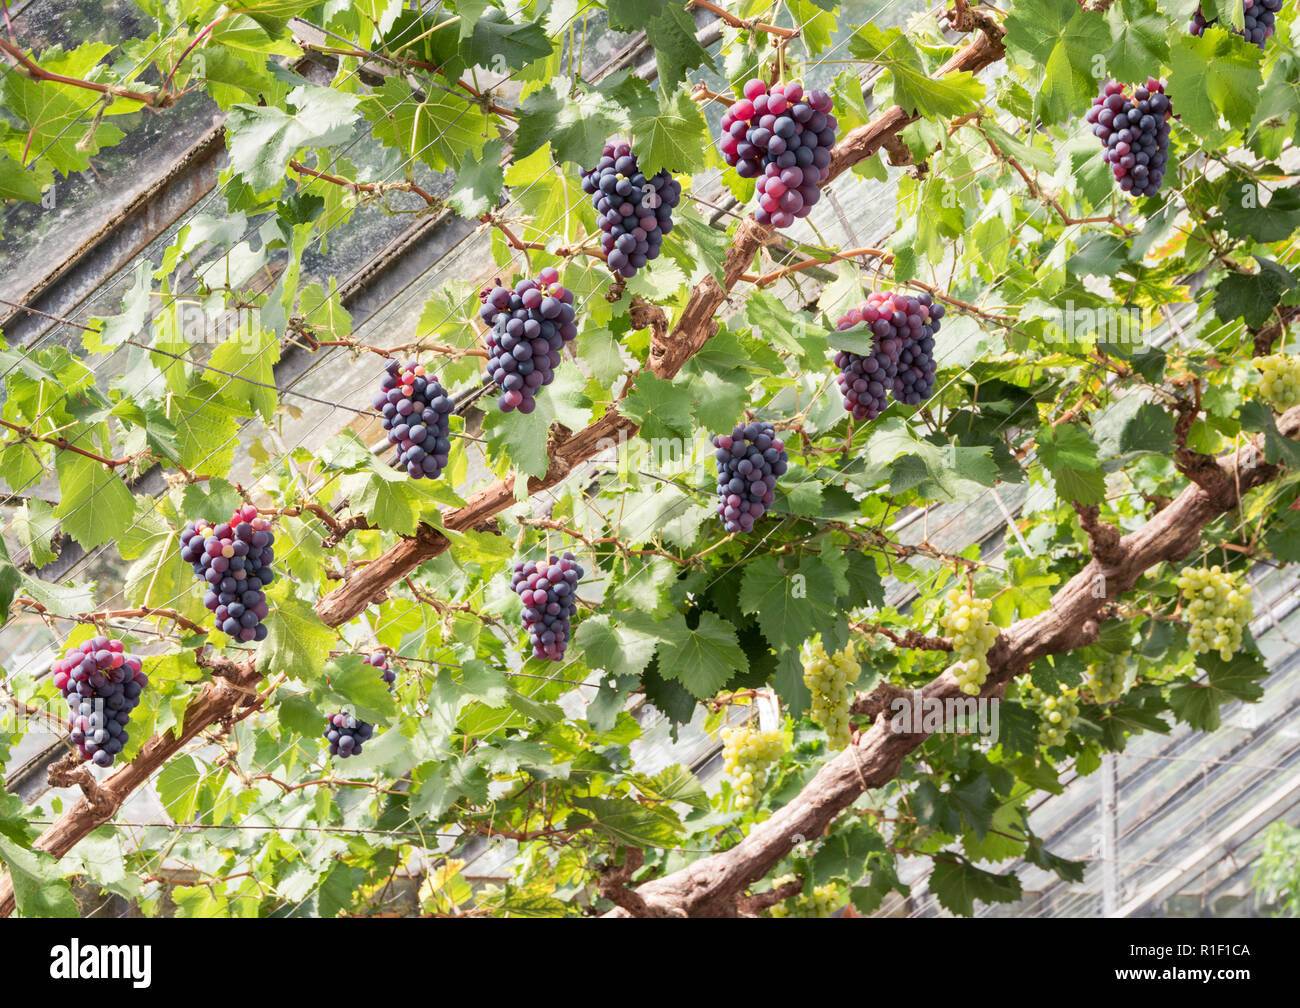 Grapes growing on trained vines inside a greenhouse. Stock Photo